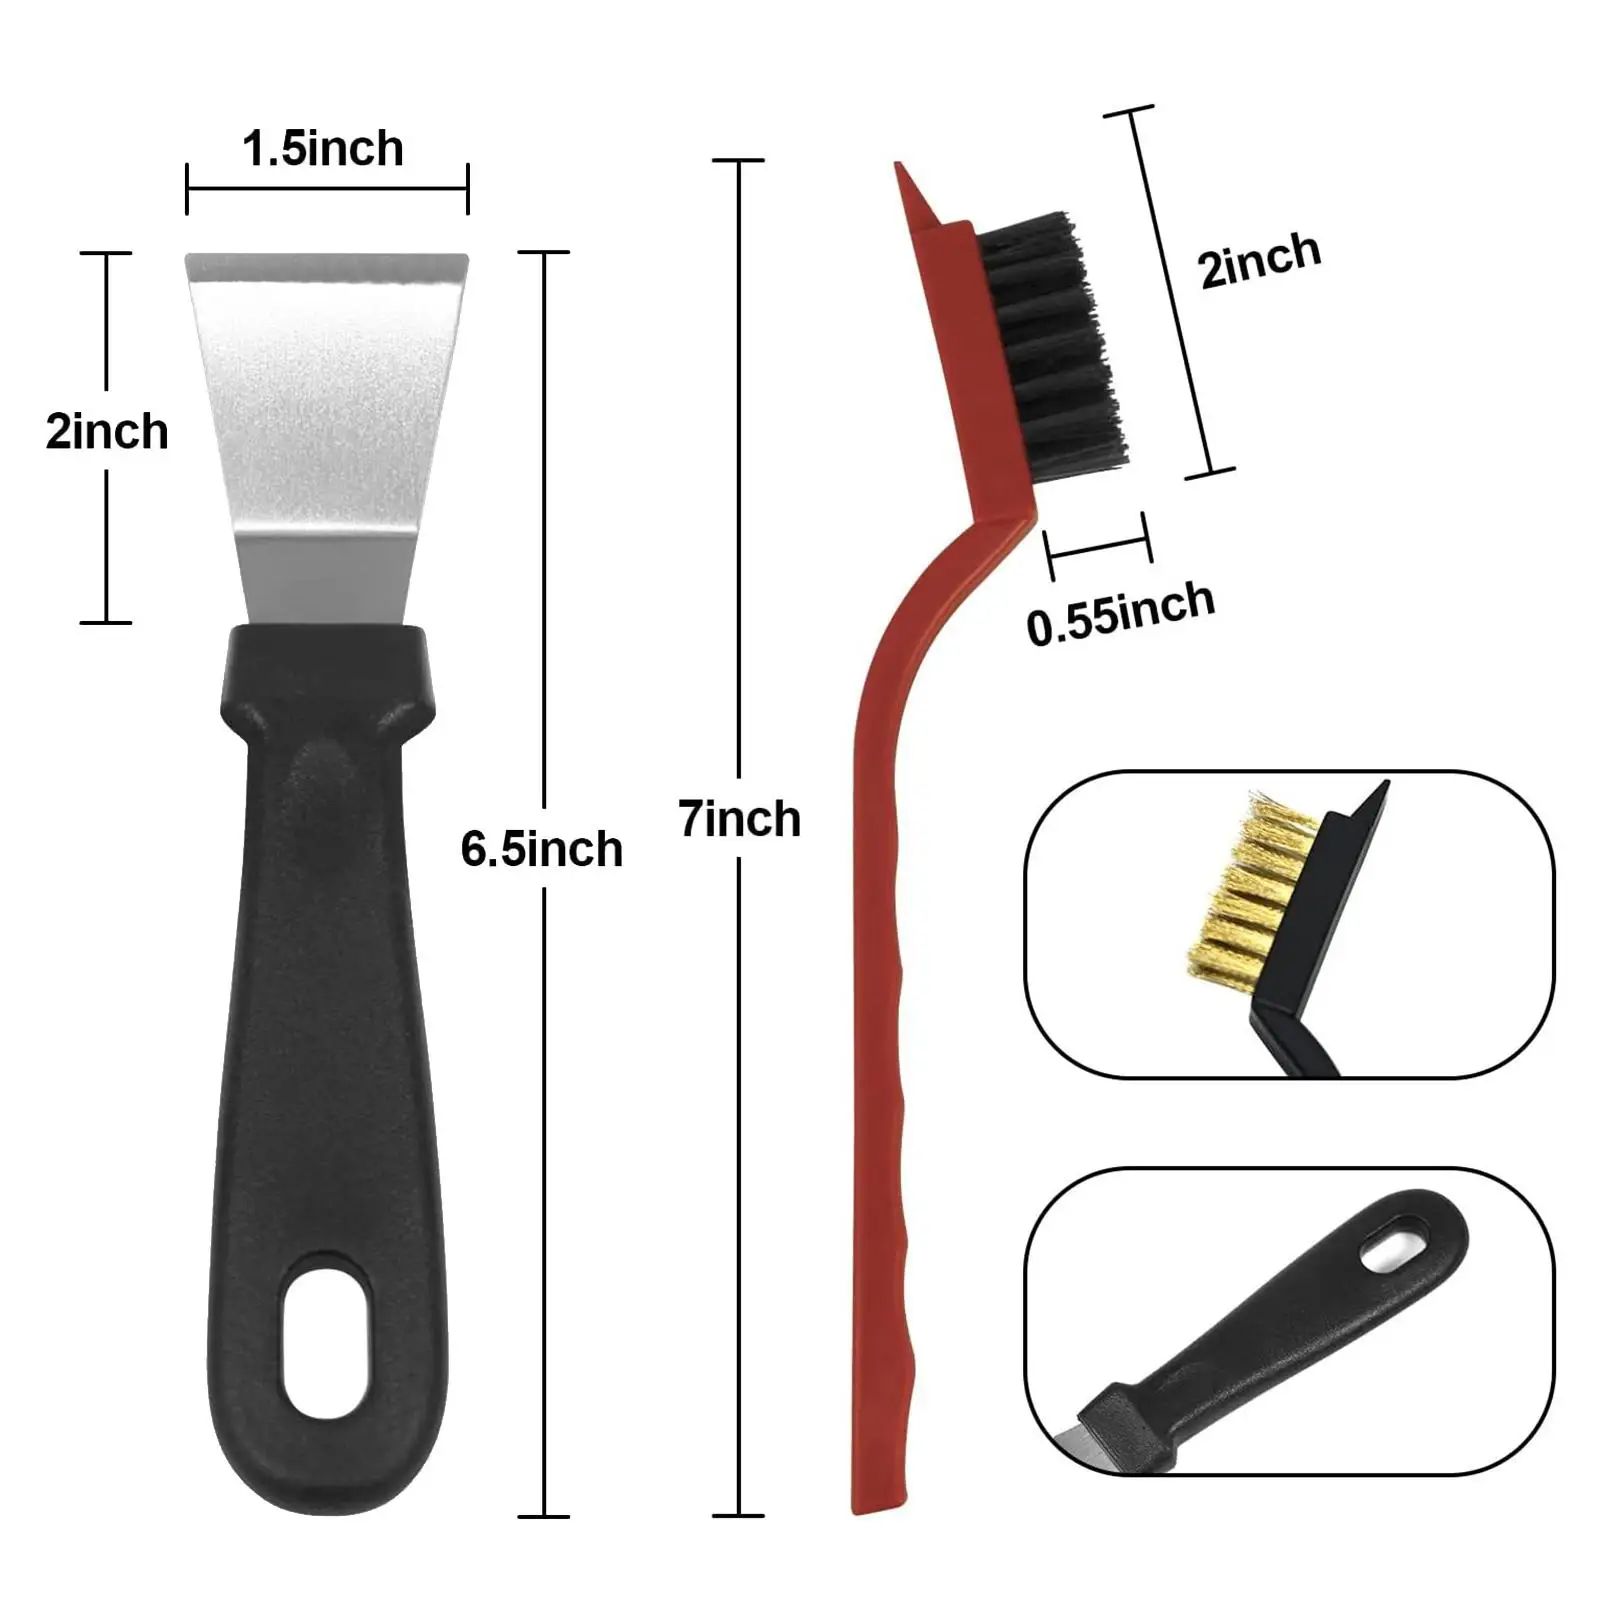 5x Wire Brush Set Scraper Tool for Cleaning Welding Slag, Paint and Dust with Curved Handle Grip Stove Cleaning Brush